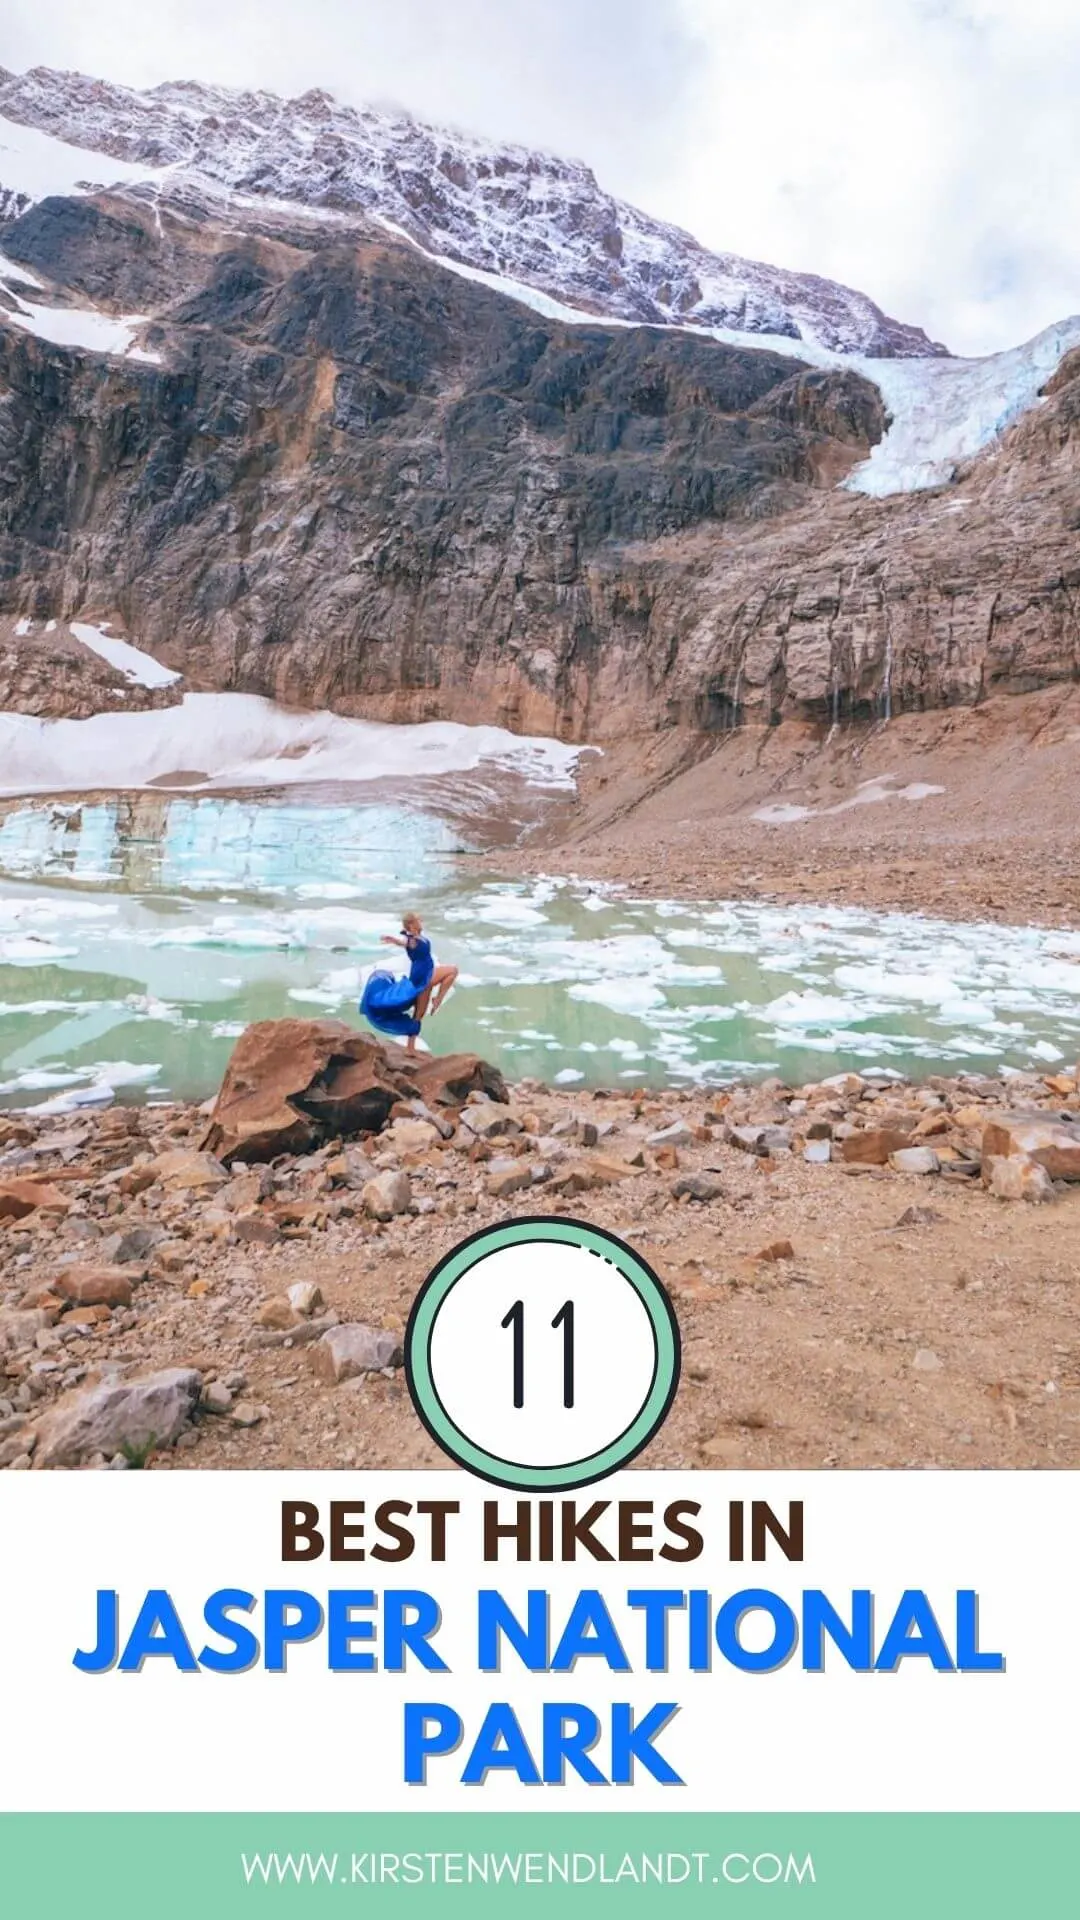 It's no surprise that Jasper National Park has some pretty incredible hikes. Being surrounded by mountains, lakes and wildlife basically screams amazing hiking opportunities ahead! But which hikes should you do when visiting Jasper? This guide lists the best hikes in Jasper National Park by skill level, now all you have to do is choose! 